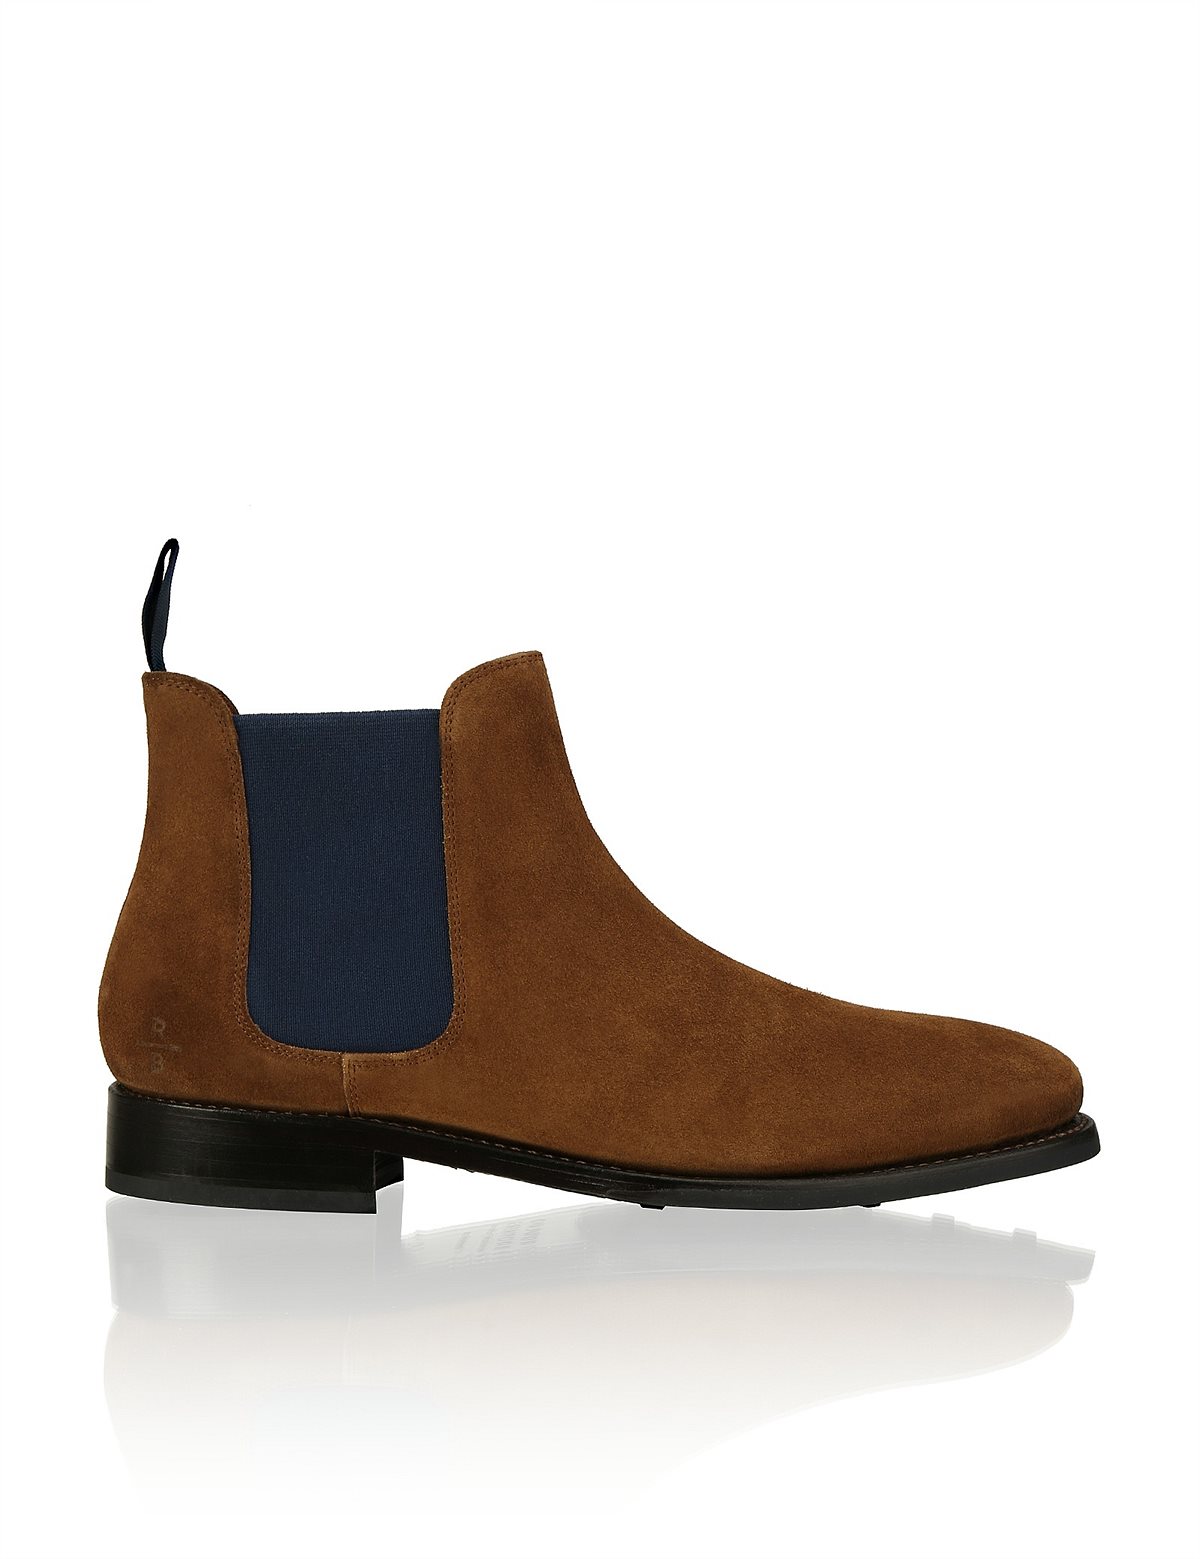 HUMANIC 14 Rowland Brothers Veloursleder Chelsea Boot EUR 150 ab Mitte August 2113601452